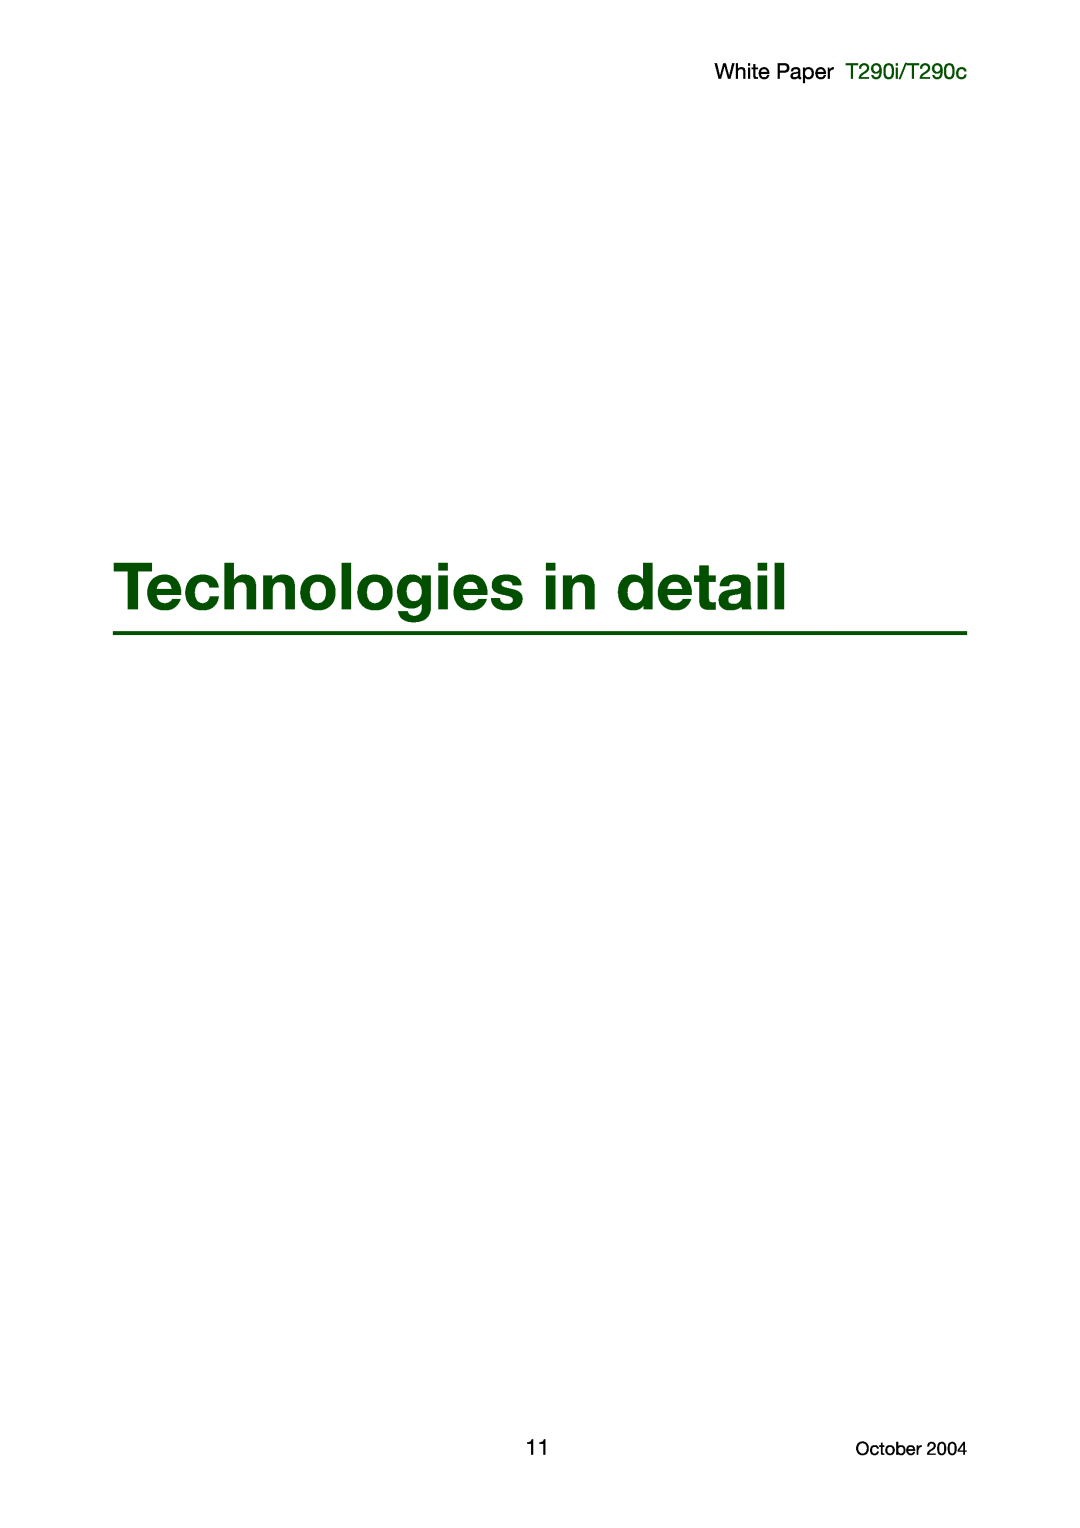 Sony Ericsson manual Technologies in detail, White Paper T290i/T290c 